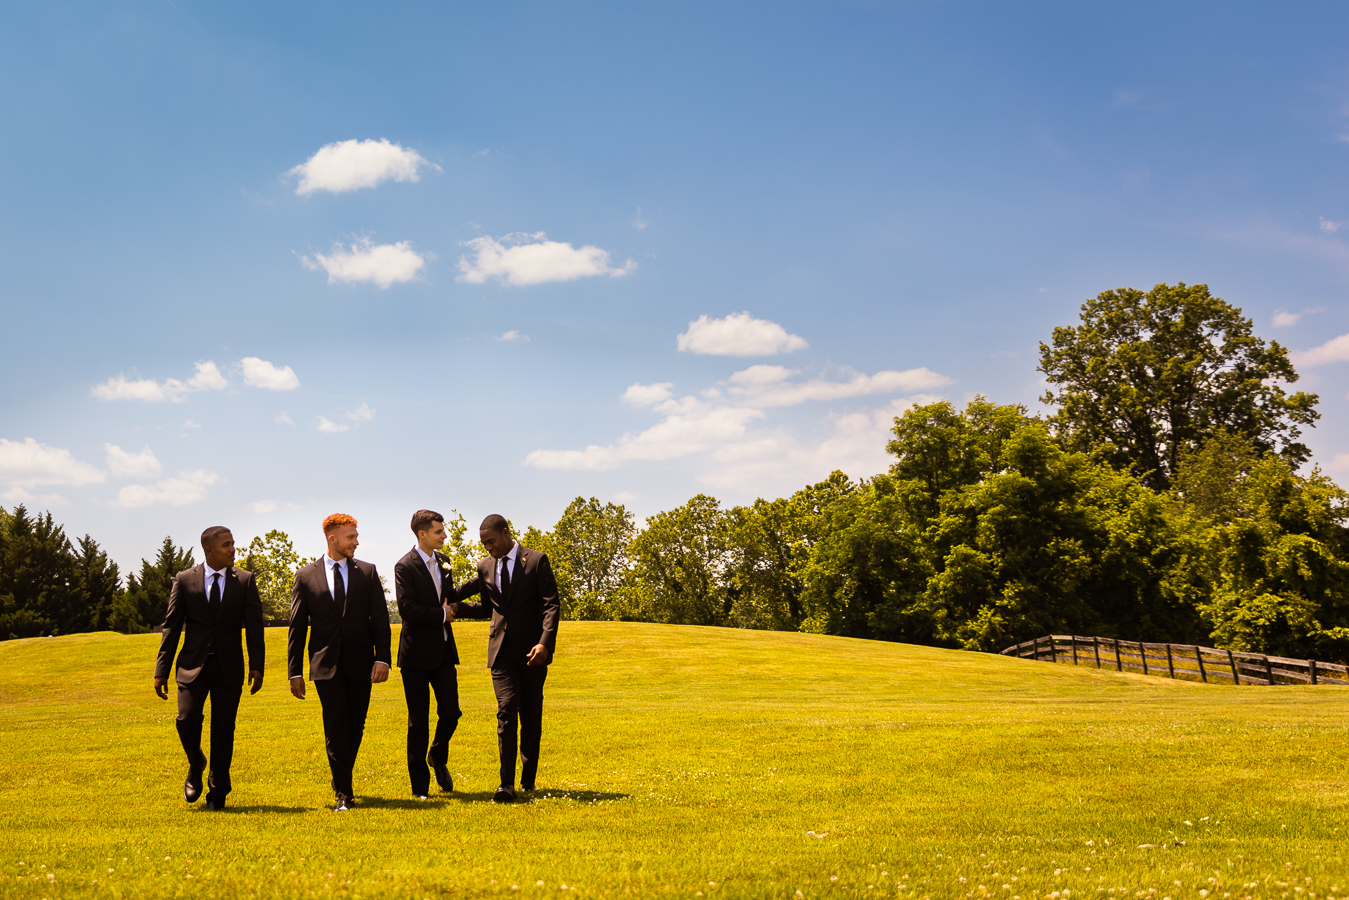 creative, authentic, candid image of the groom as he walks and laughs through the field with his groomsmen captured by virginia wedding photographer, lisa rhinehart